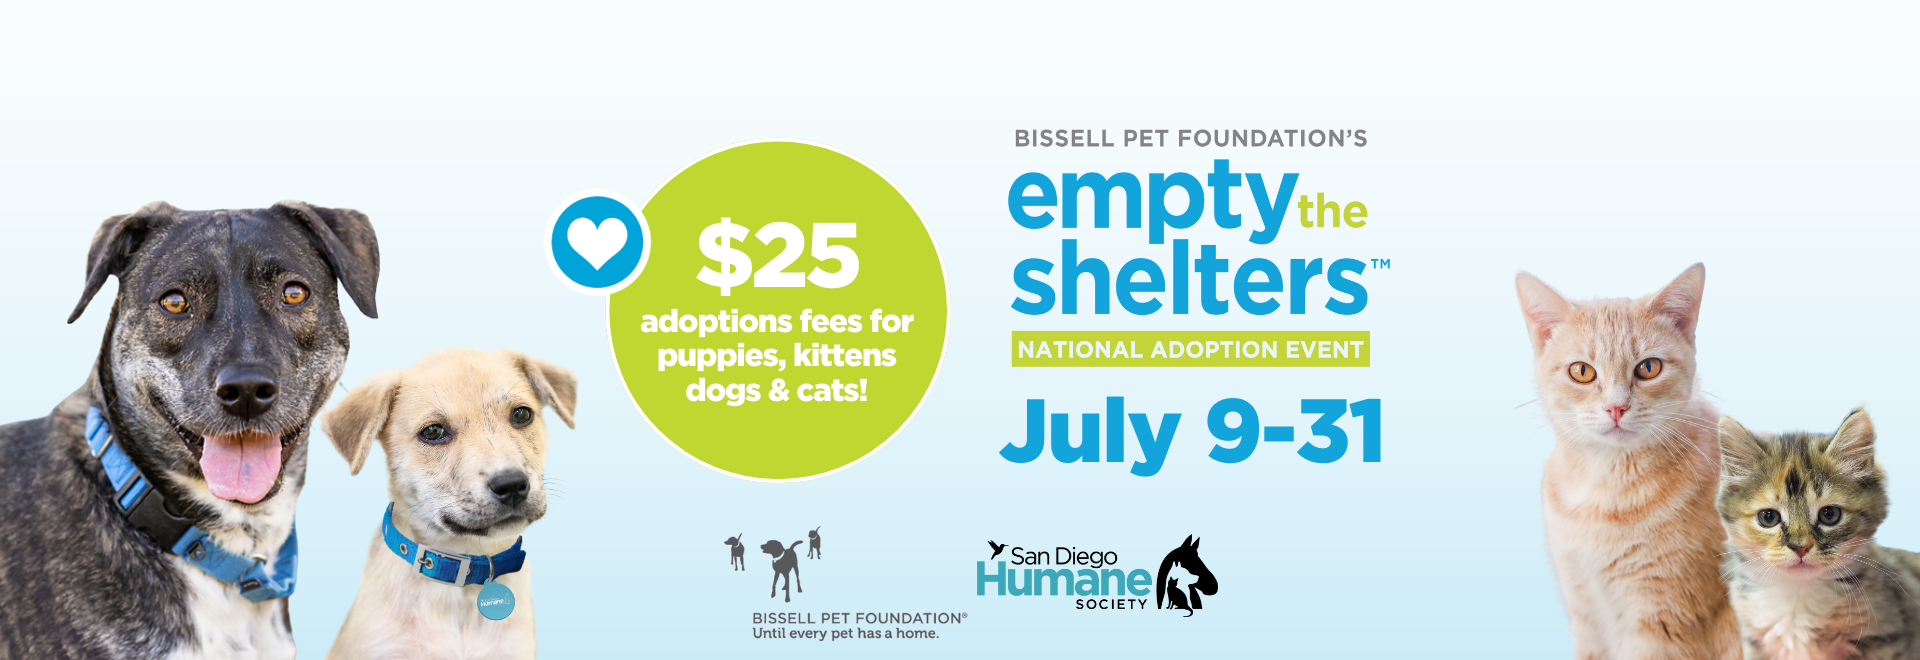 Bissell Pet Foundation's Empty the Shelters National Adoption Event July 9 -31 | $25 adoptions fees for puppies, kittens, dogs & cats